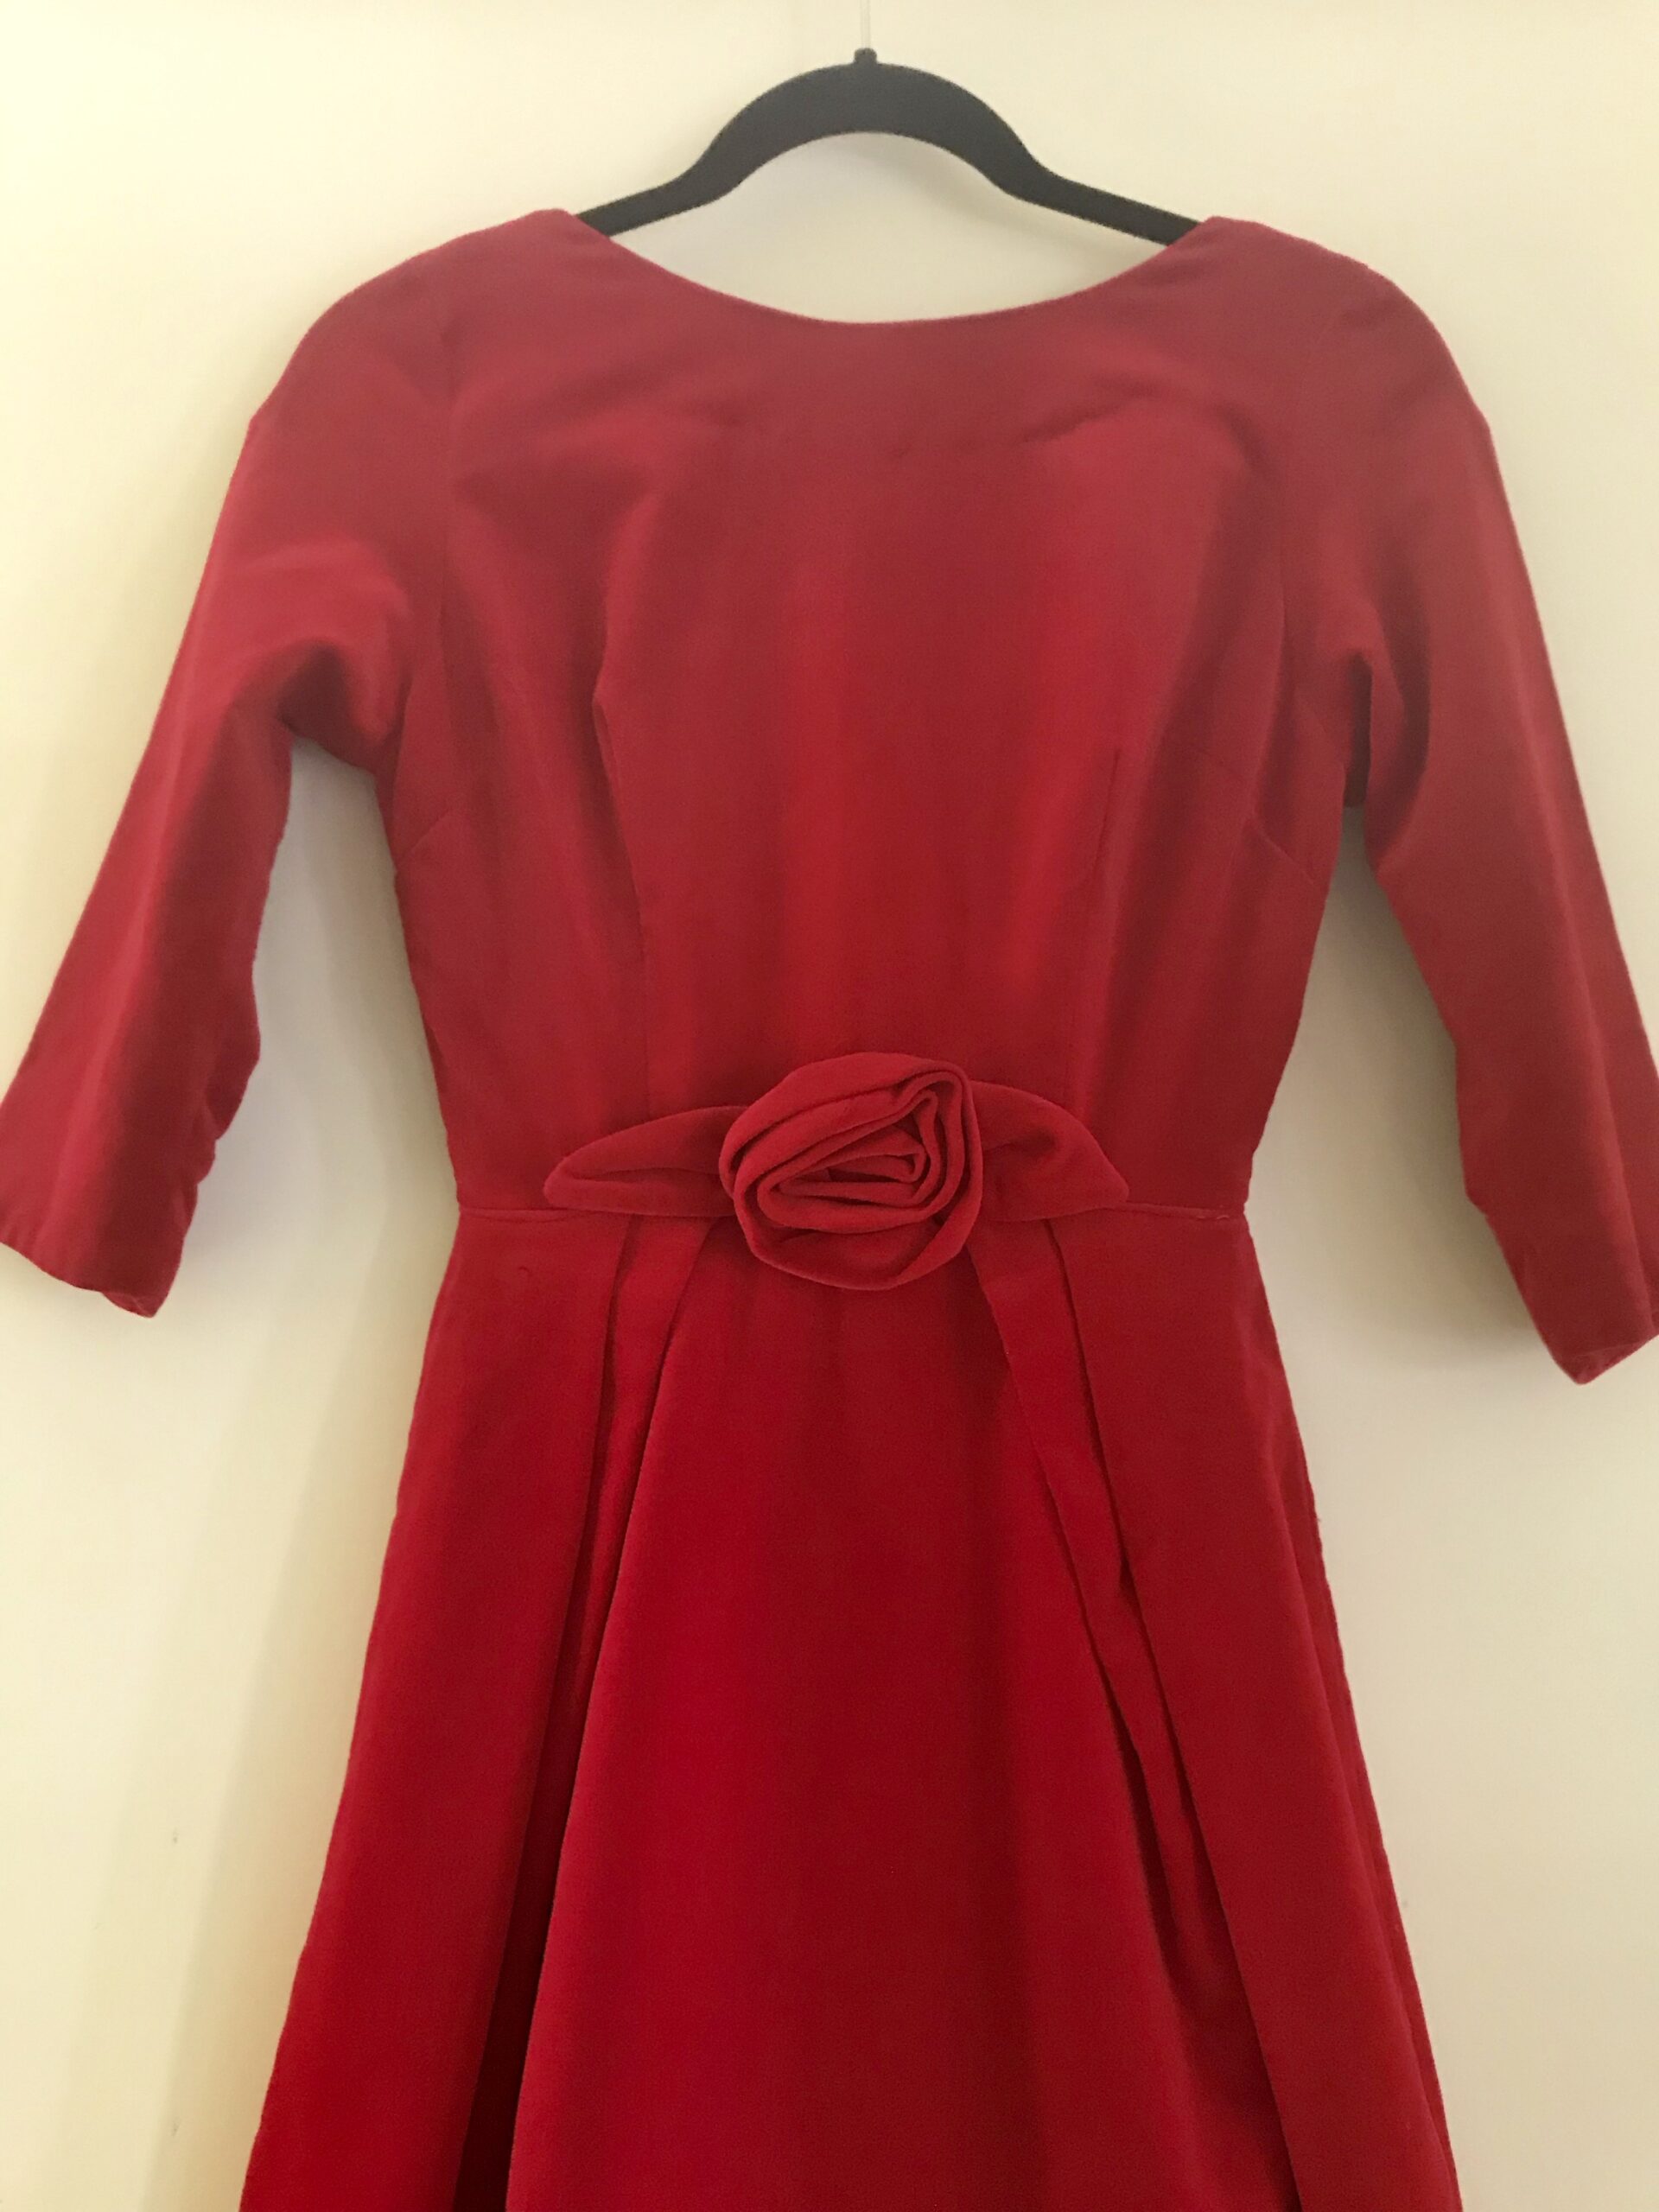 1950'S RED VELVET DRESS SIZE SMALL( XSSW) - Vintage Clothing | Lou ...